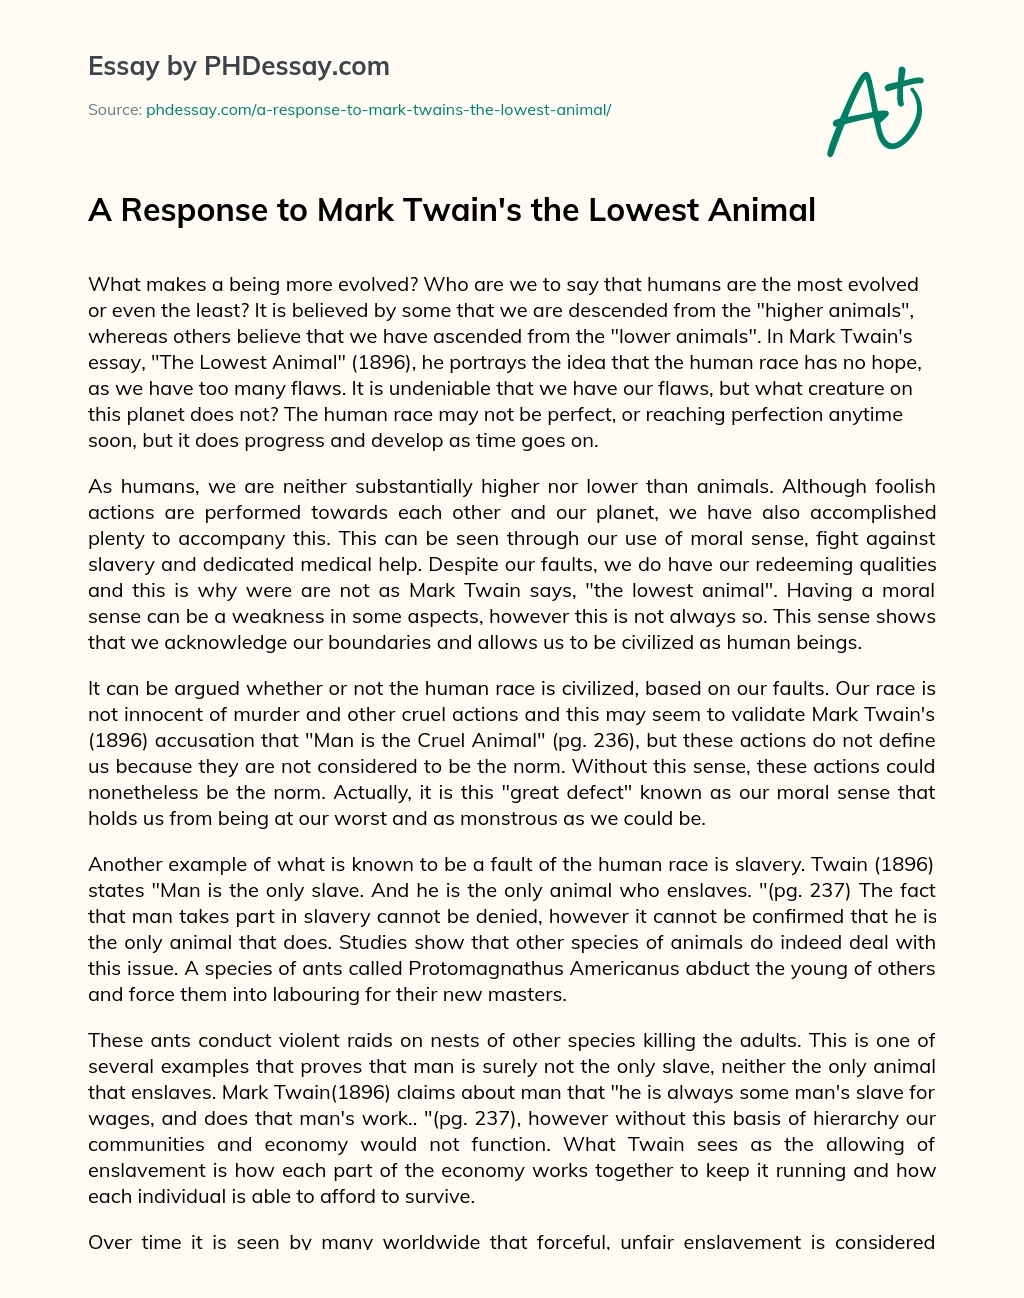 A Response to Mark Twain’s the Lowest Animal essay